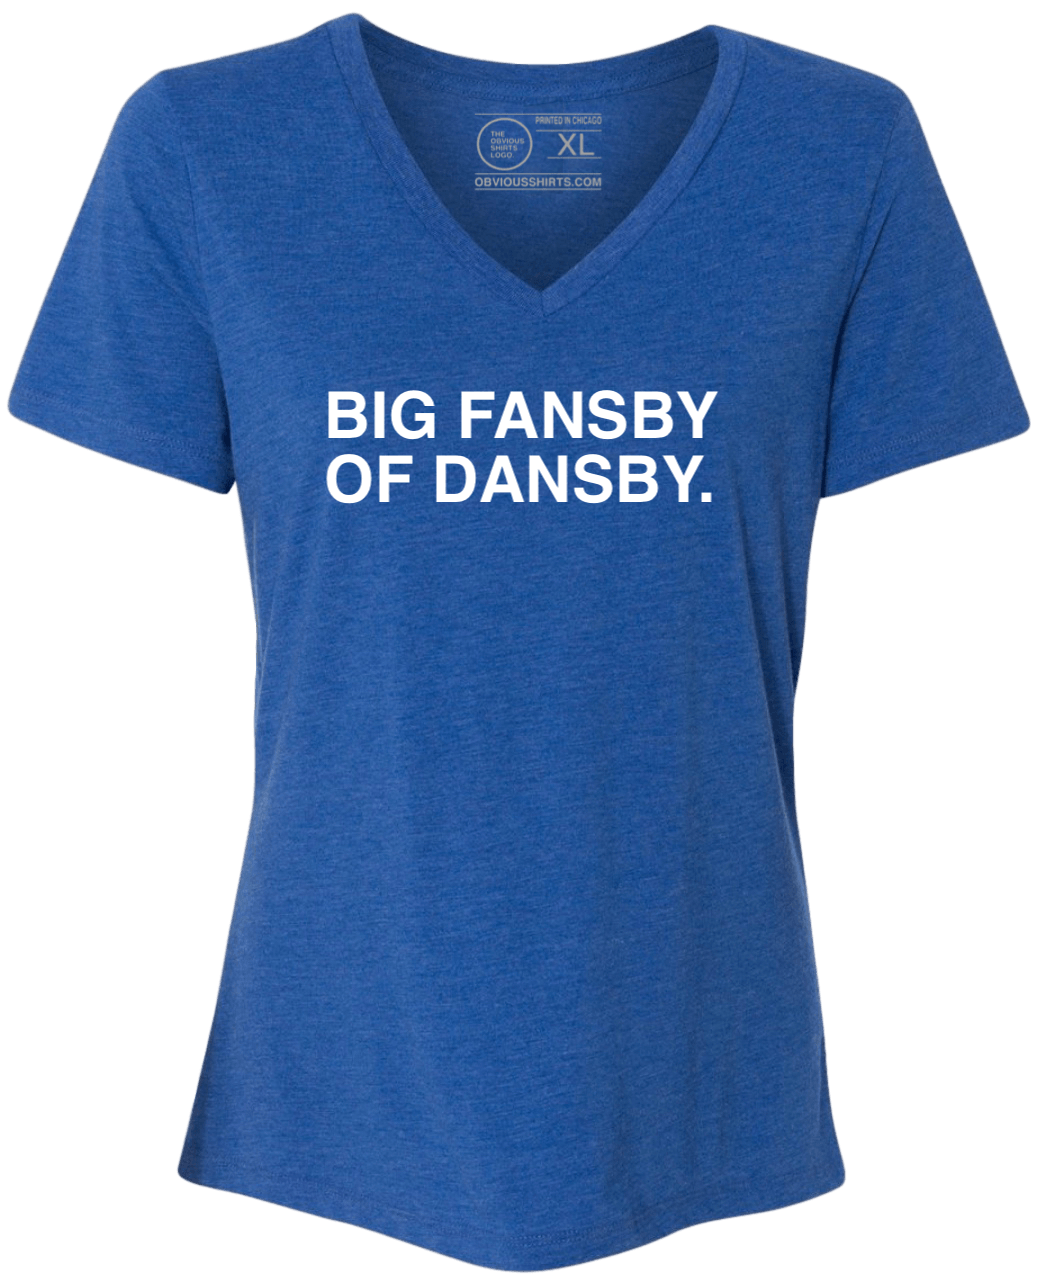 BIG FANSBY OF DANSBY. (WOMEN'S V-NECK) - OBVIOUS SHIRTS